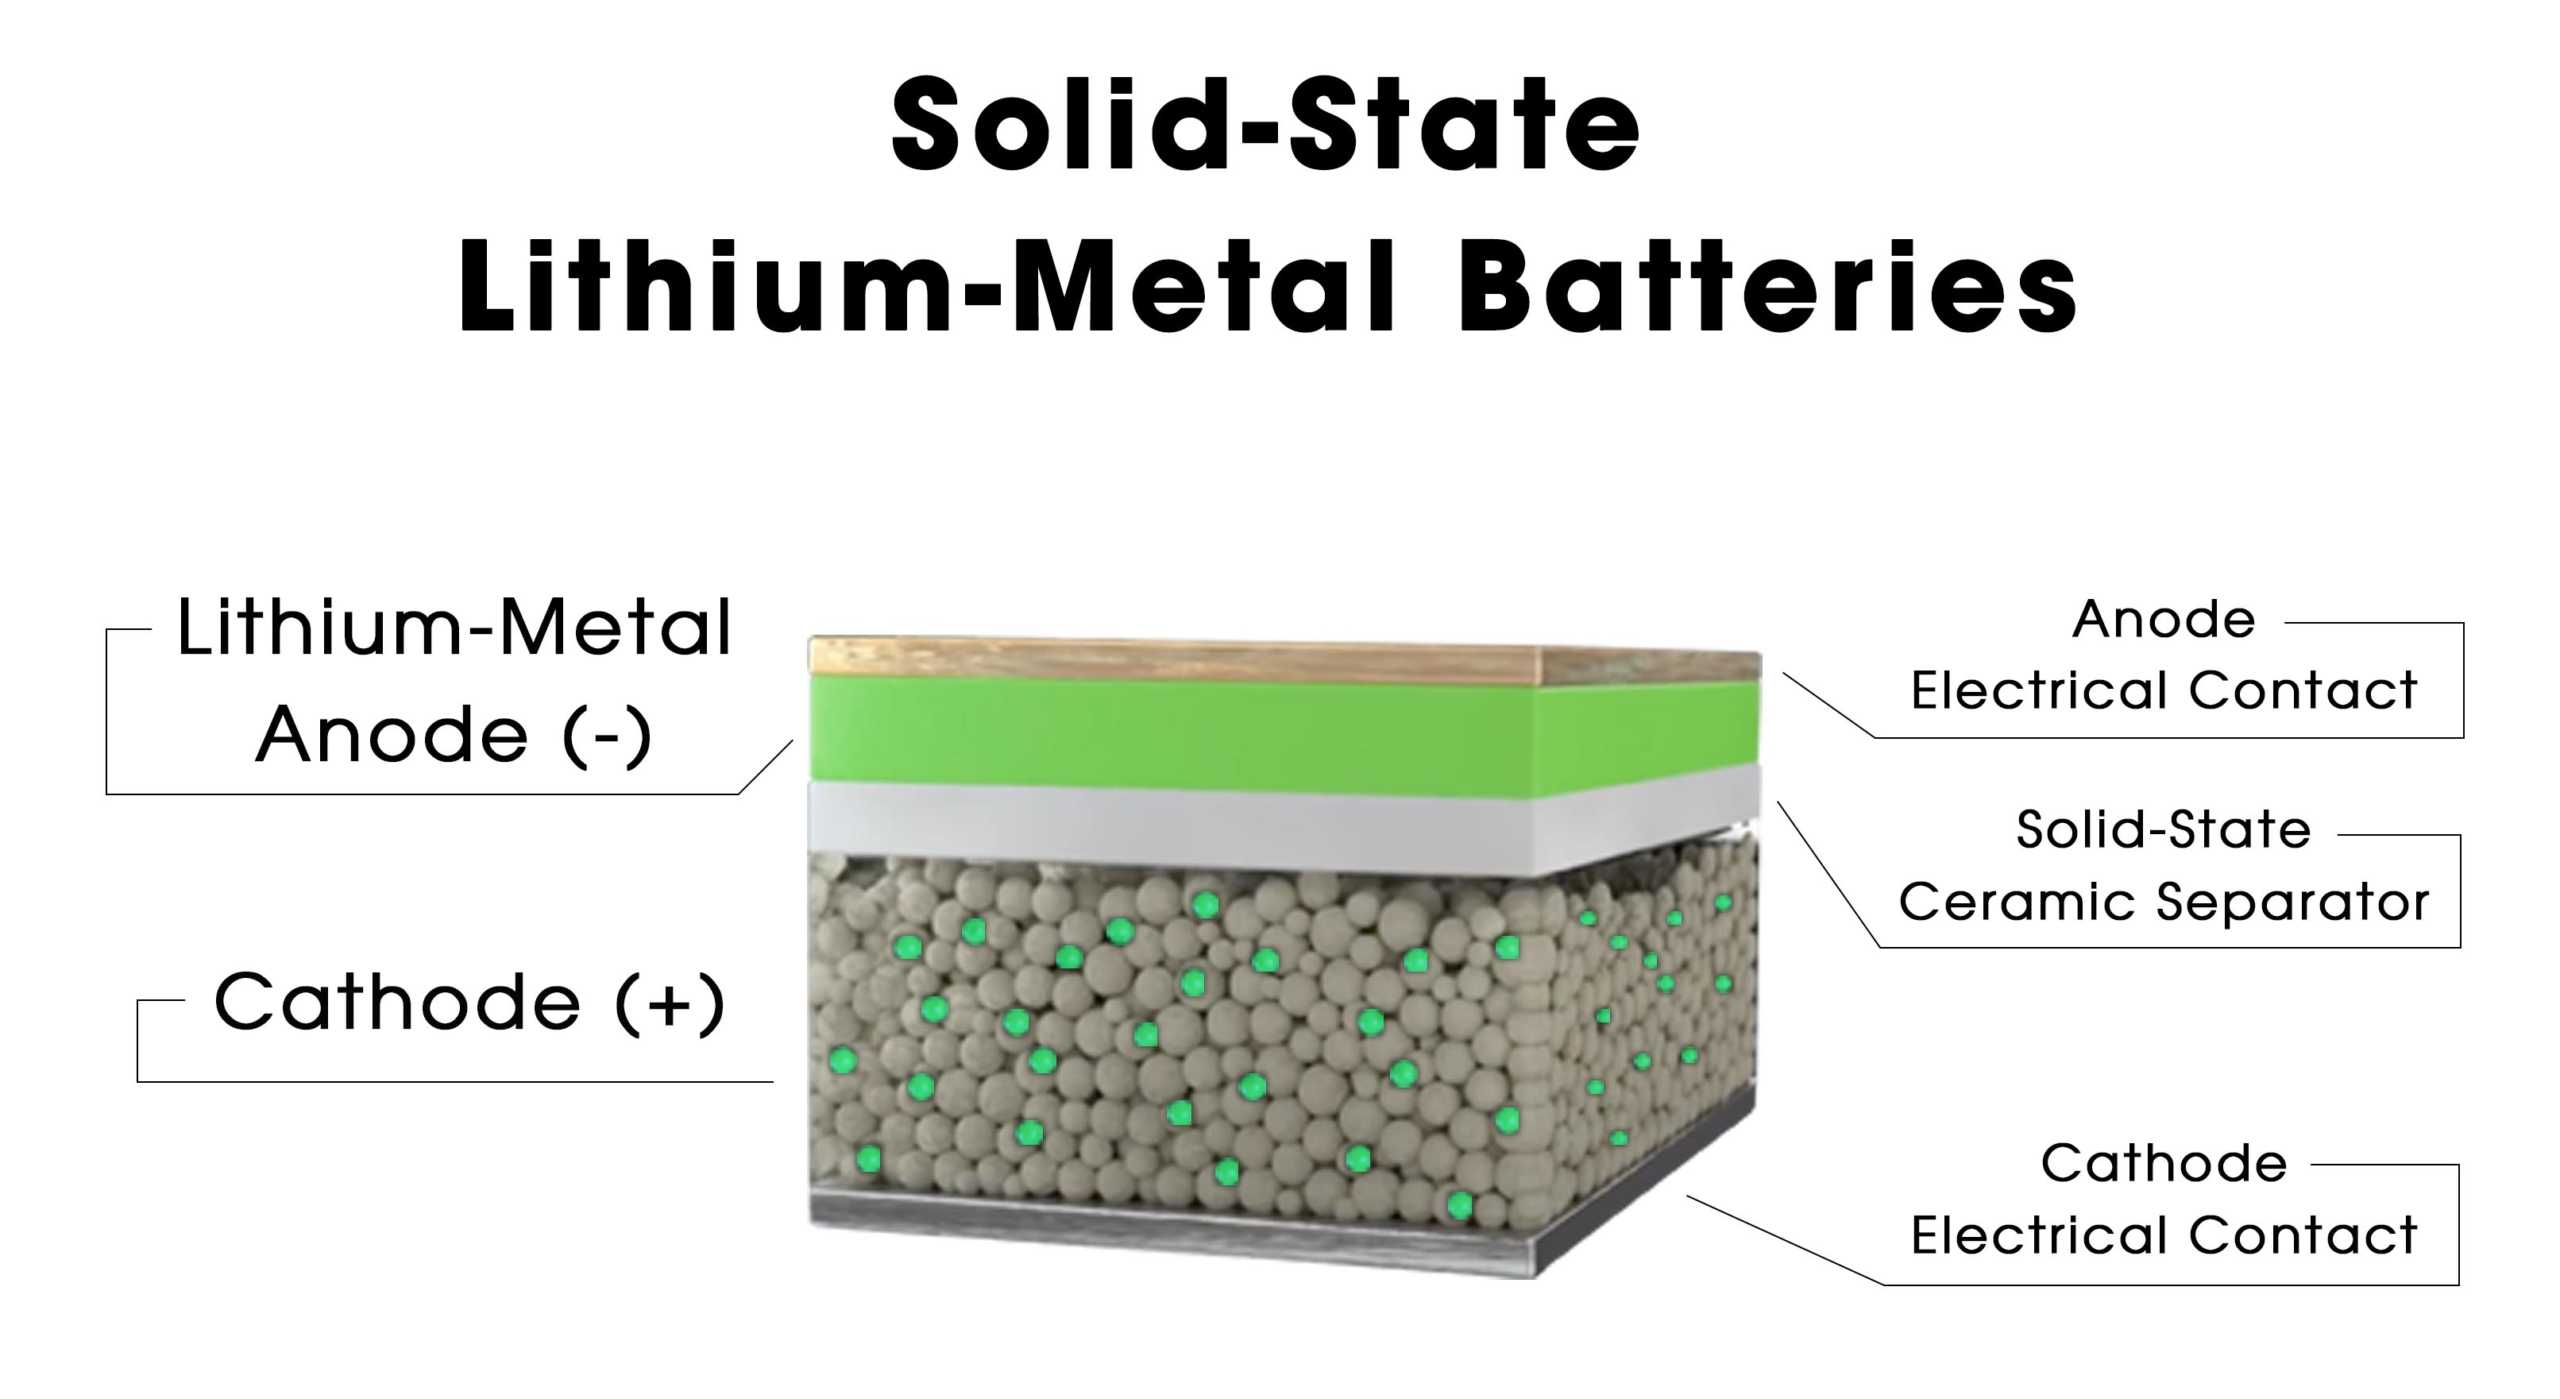 Solid-state battery electrolyte